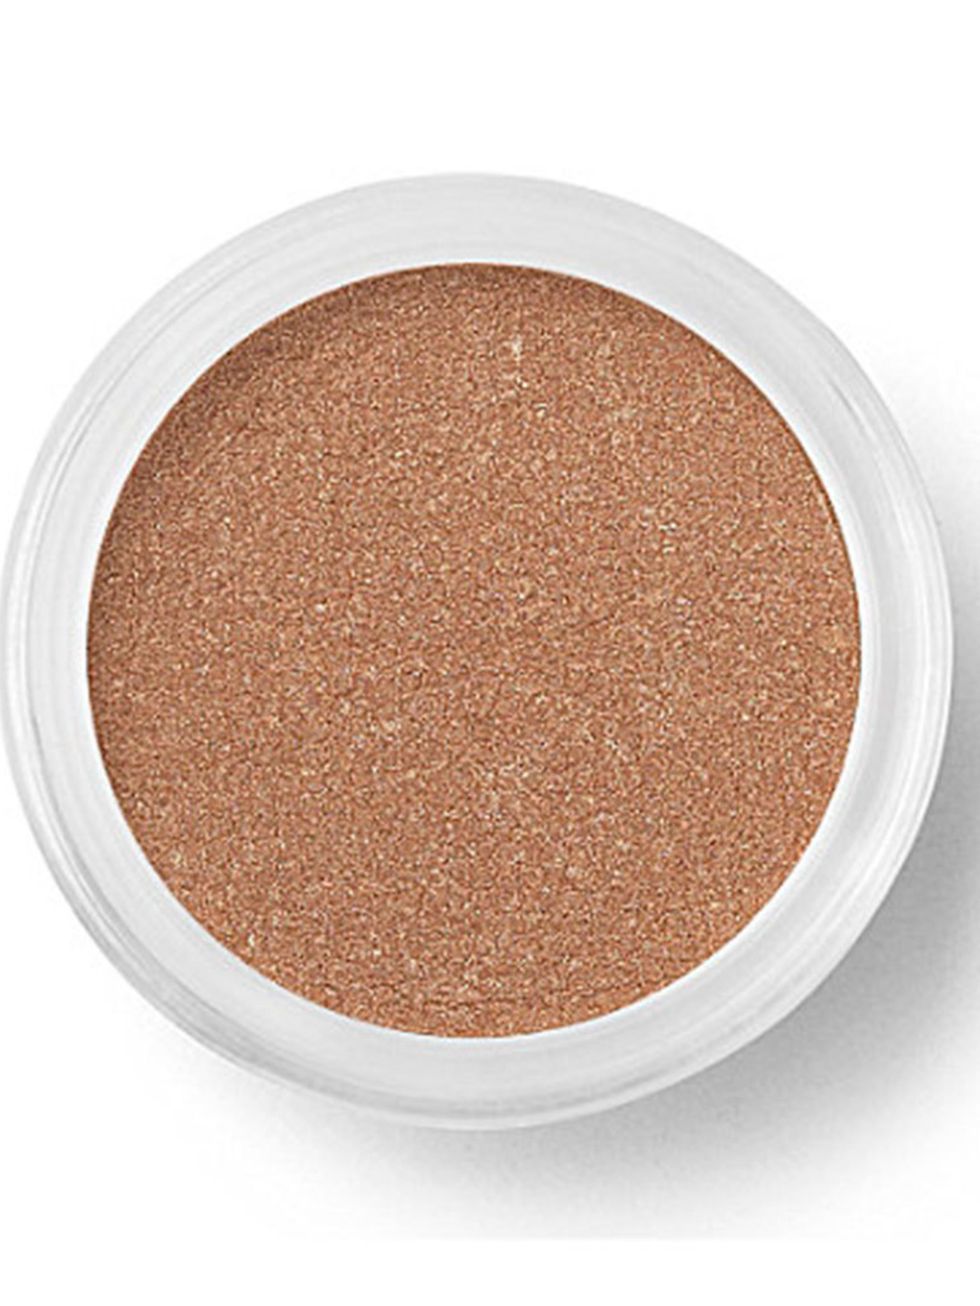 <p><a href="http://www.selfridges.com/en/bare-minerals-glimmer-eyecolor_181-3001277-GLIMMEREYE/?previewAttribute=In+the+buff" target="_blank">Bare Minerals Glimmer Eyecolour, £14.</a></p>

<p>Brown-meets-gold; a sweep of this shadow gives a barely there s